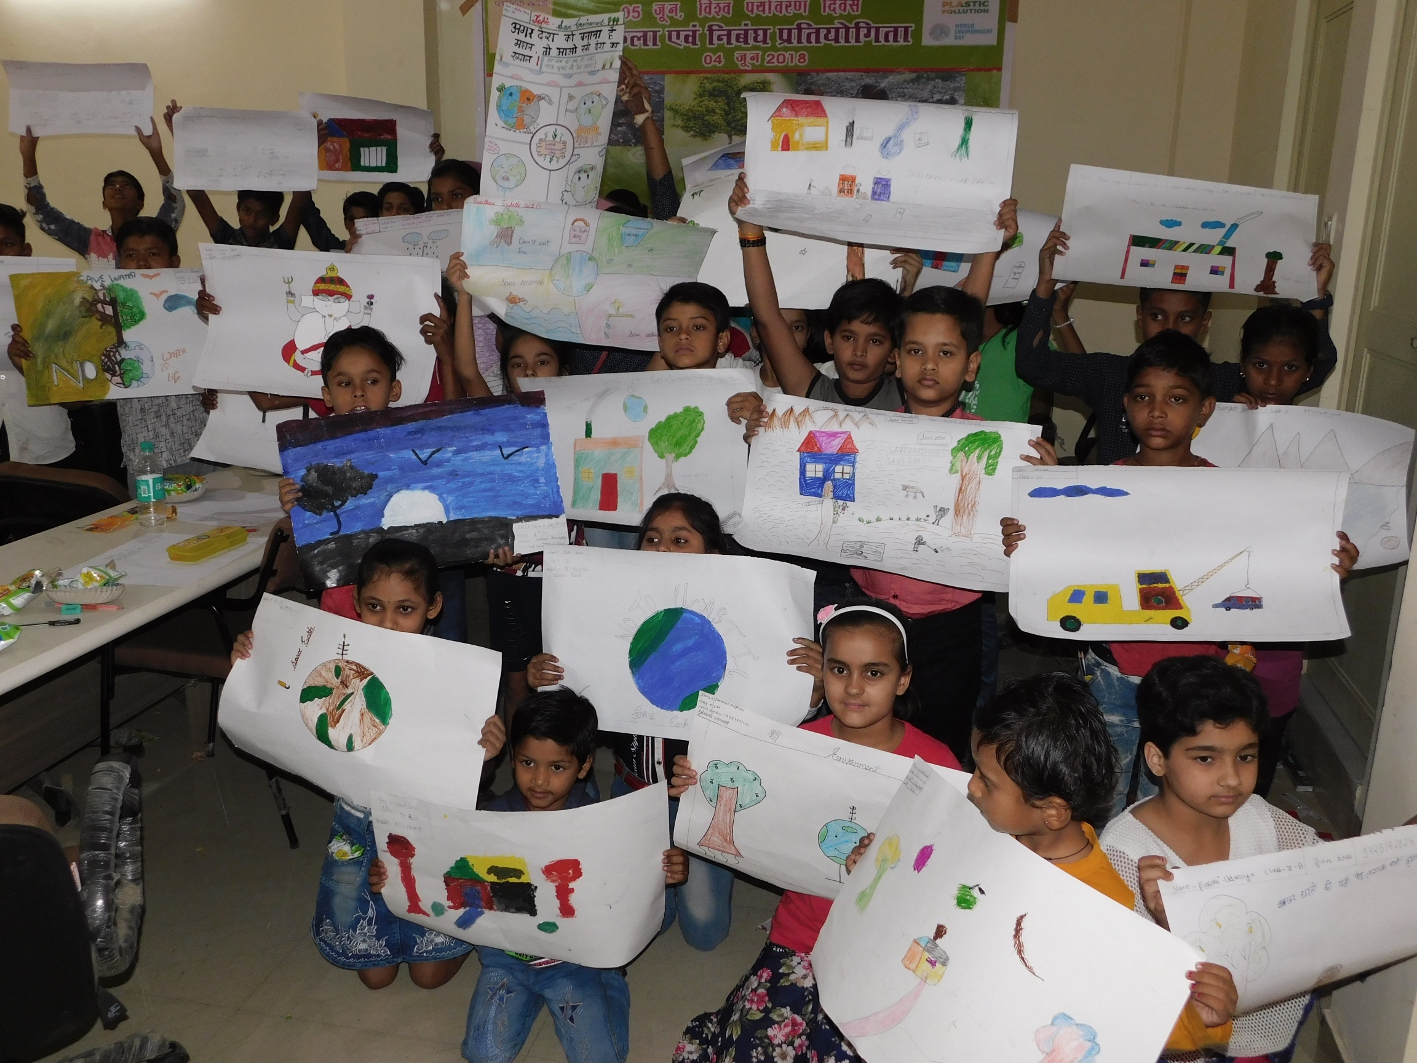 Children crafted on paper for environmental protection